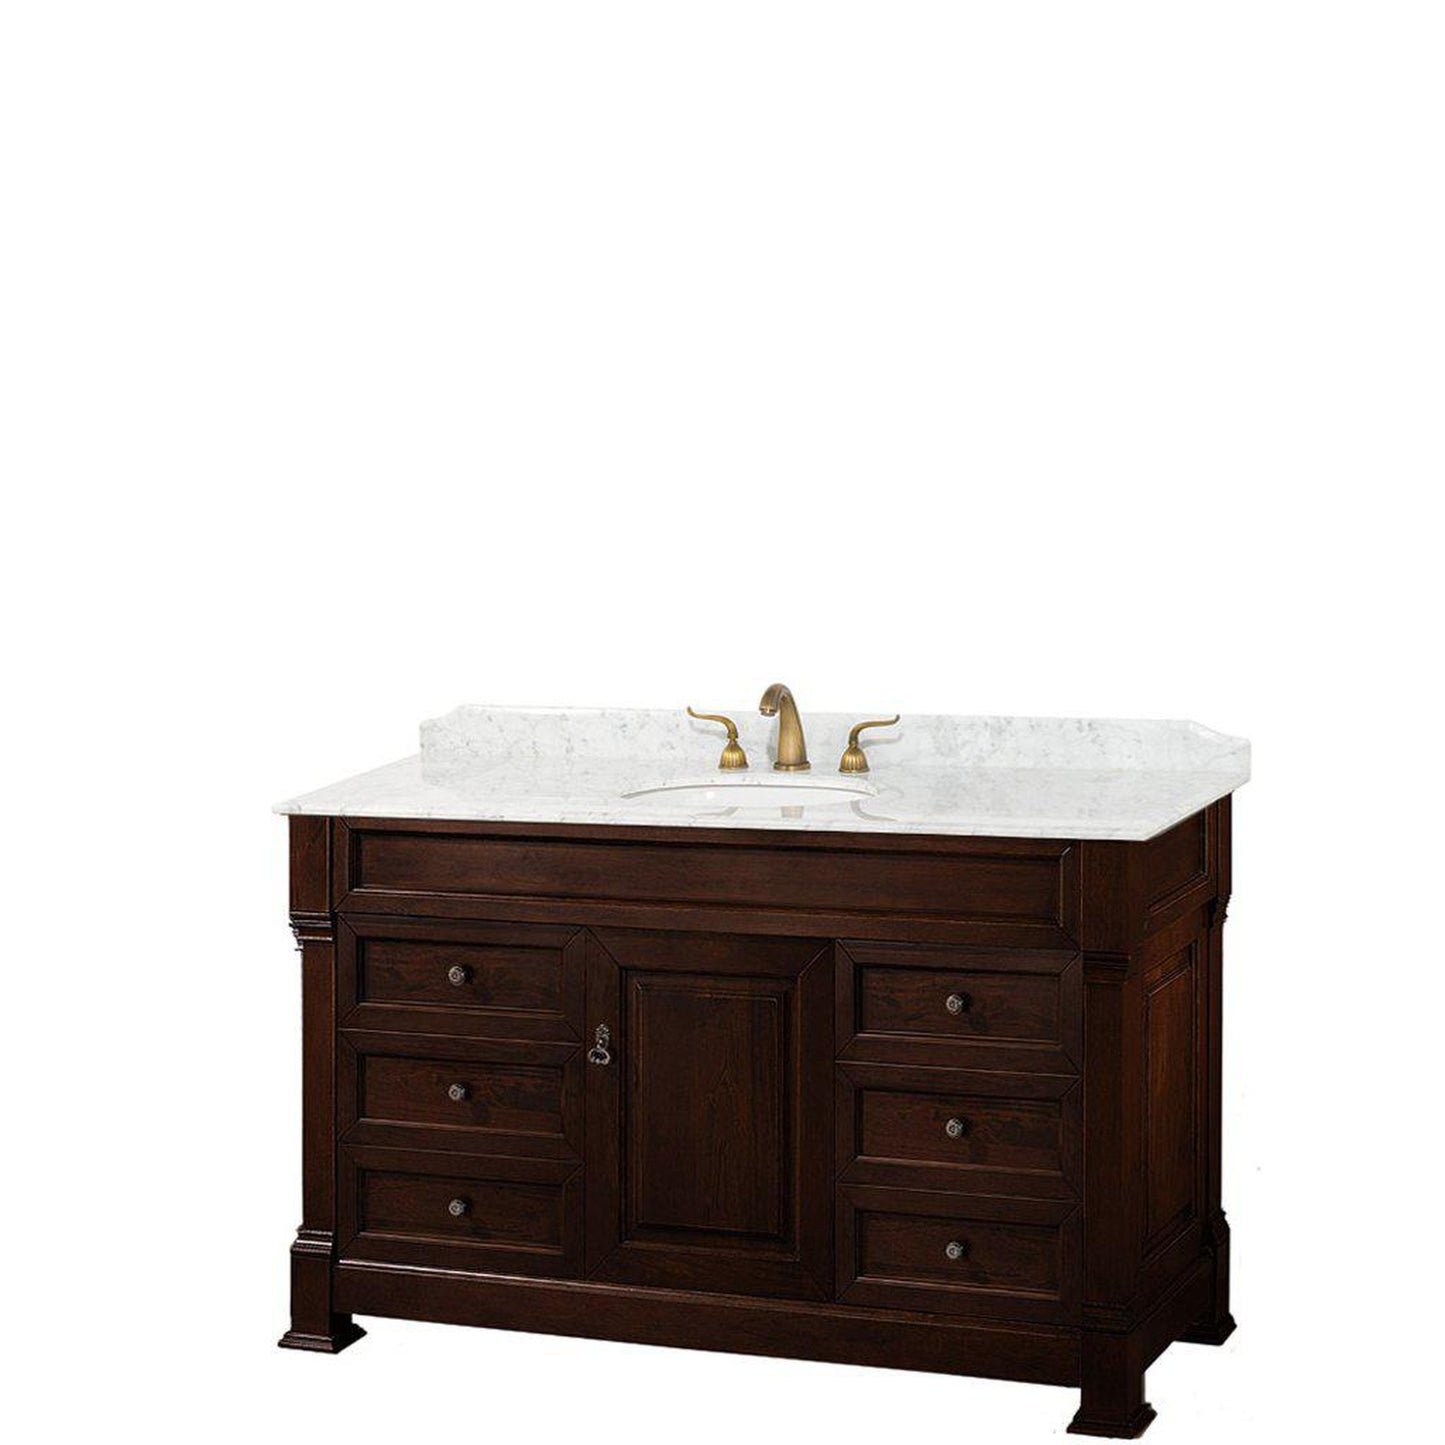 Wyndham Collection Andover 55" Single Bathroom Dark Cherry Vanity With White Carrara Marble Countertop And Undermount Oval Sink, And No Mirror